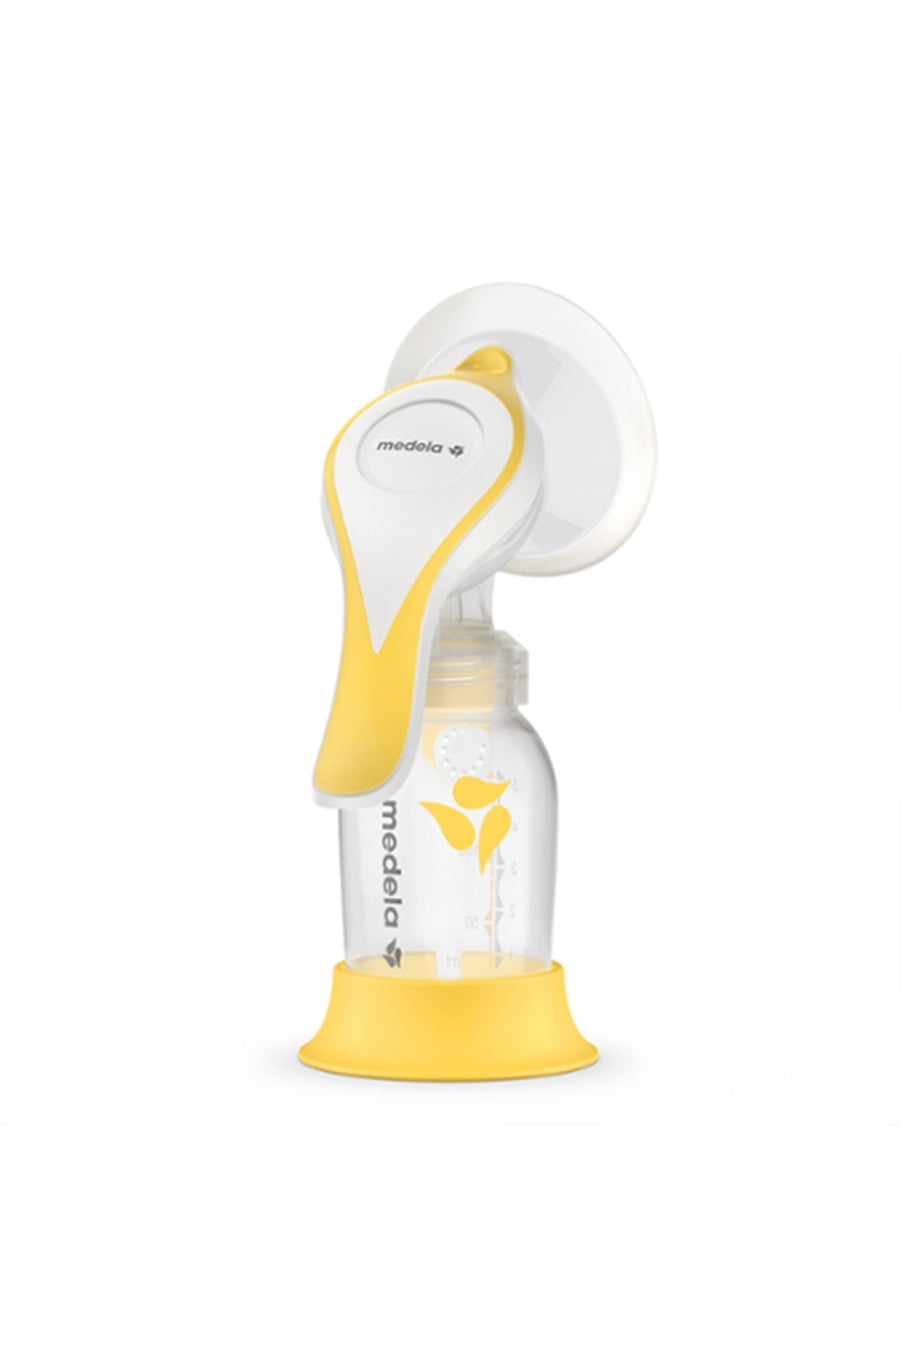 Medela Softcup Baby Bottle With Spoon 80ml, Luxury Perfume - Niche Perfume  Shop